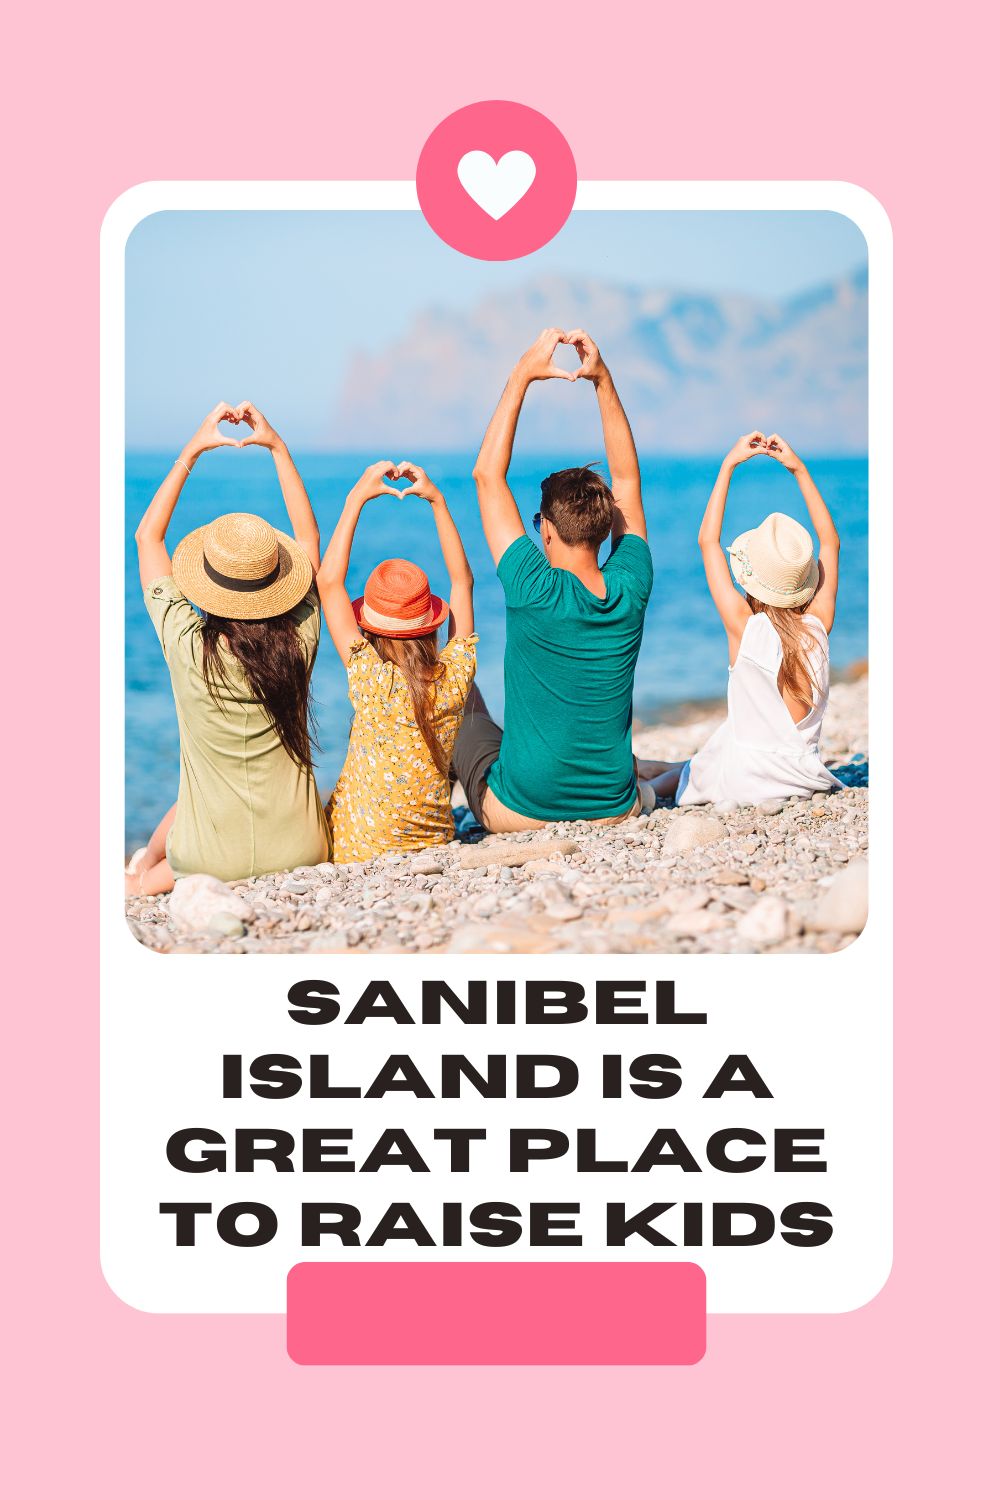 Sanibel Island is a Great Place to Raise Kids